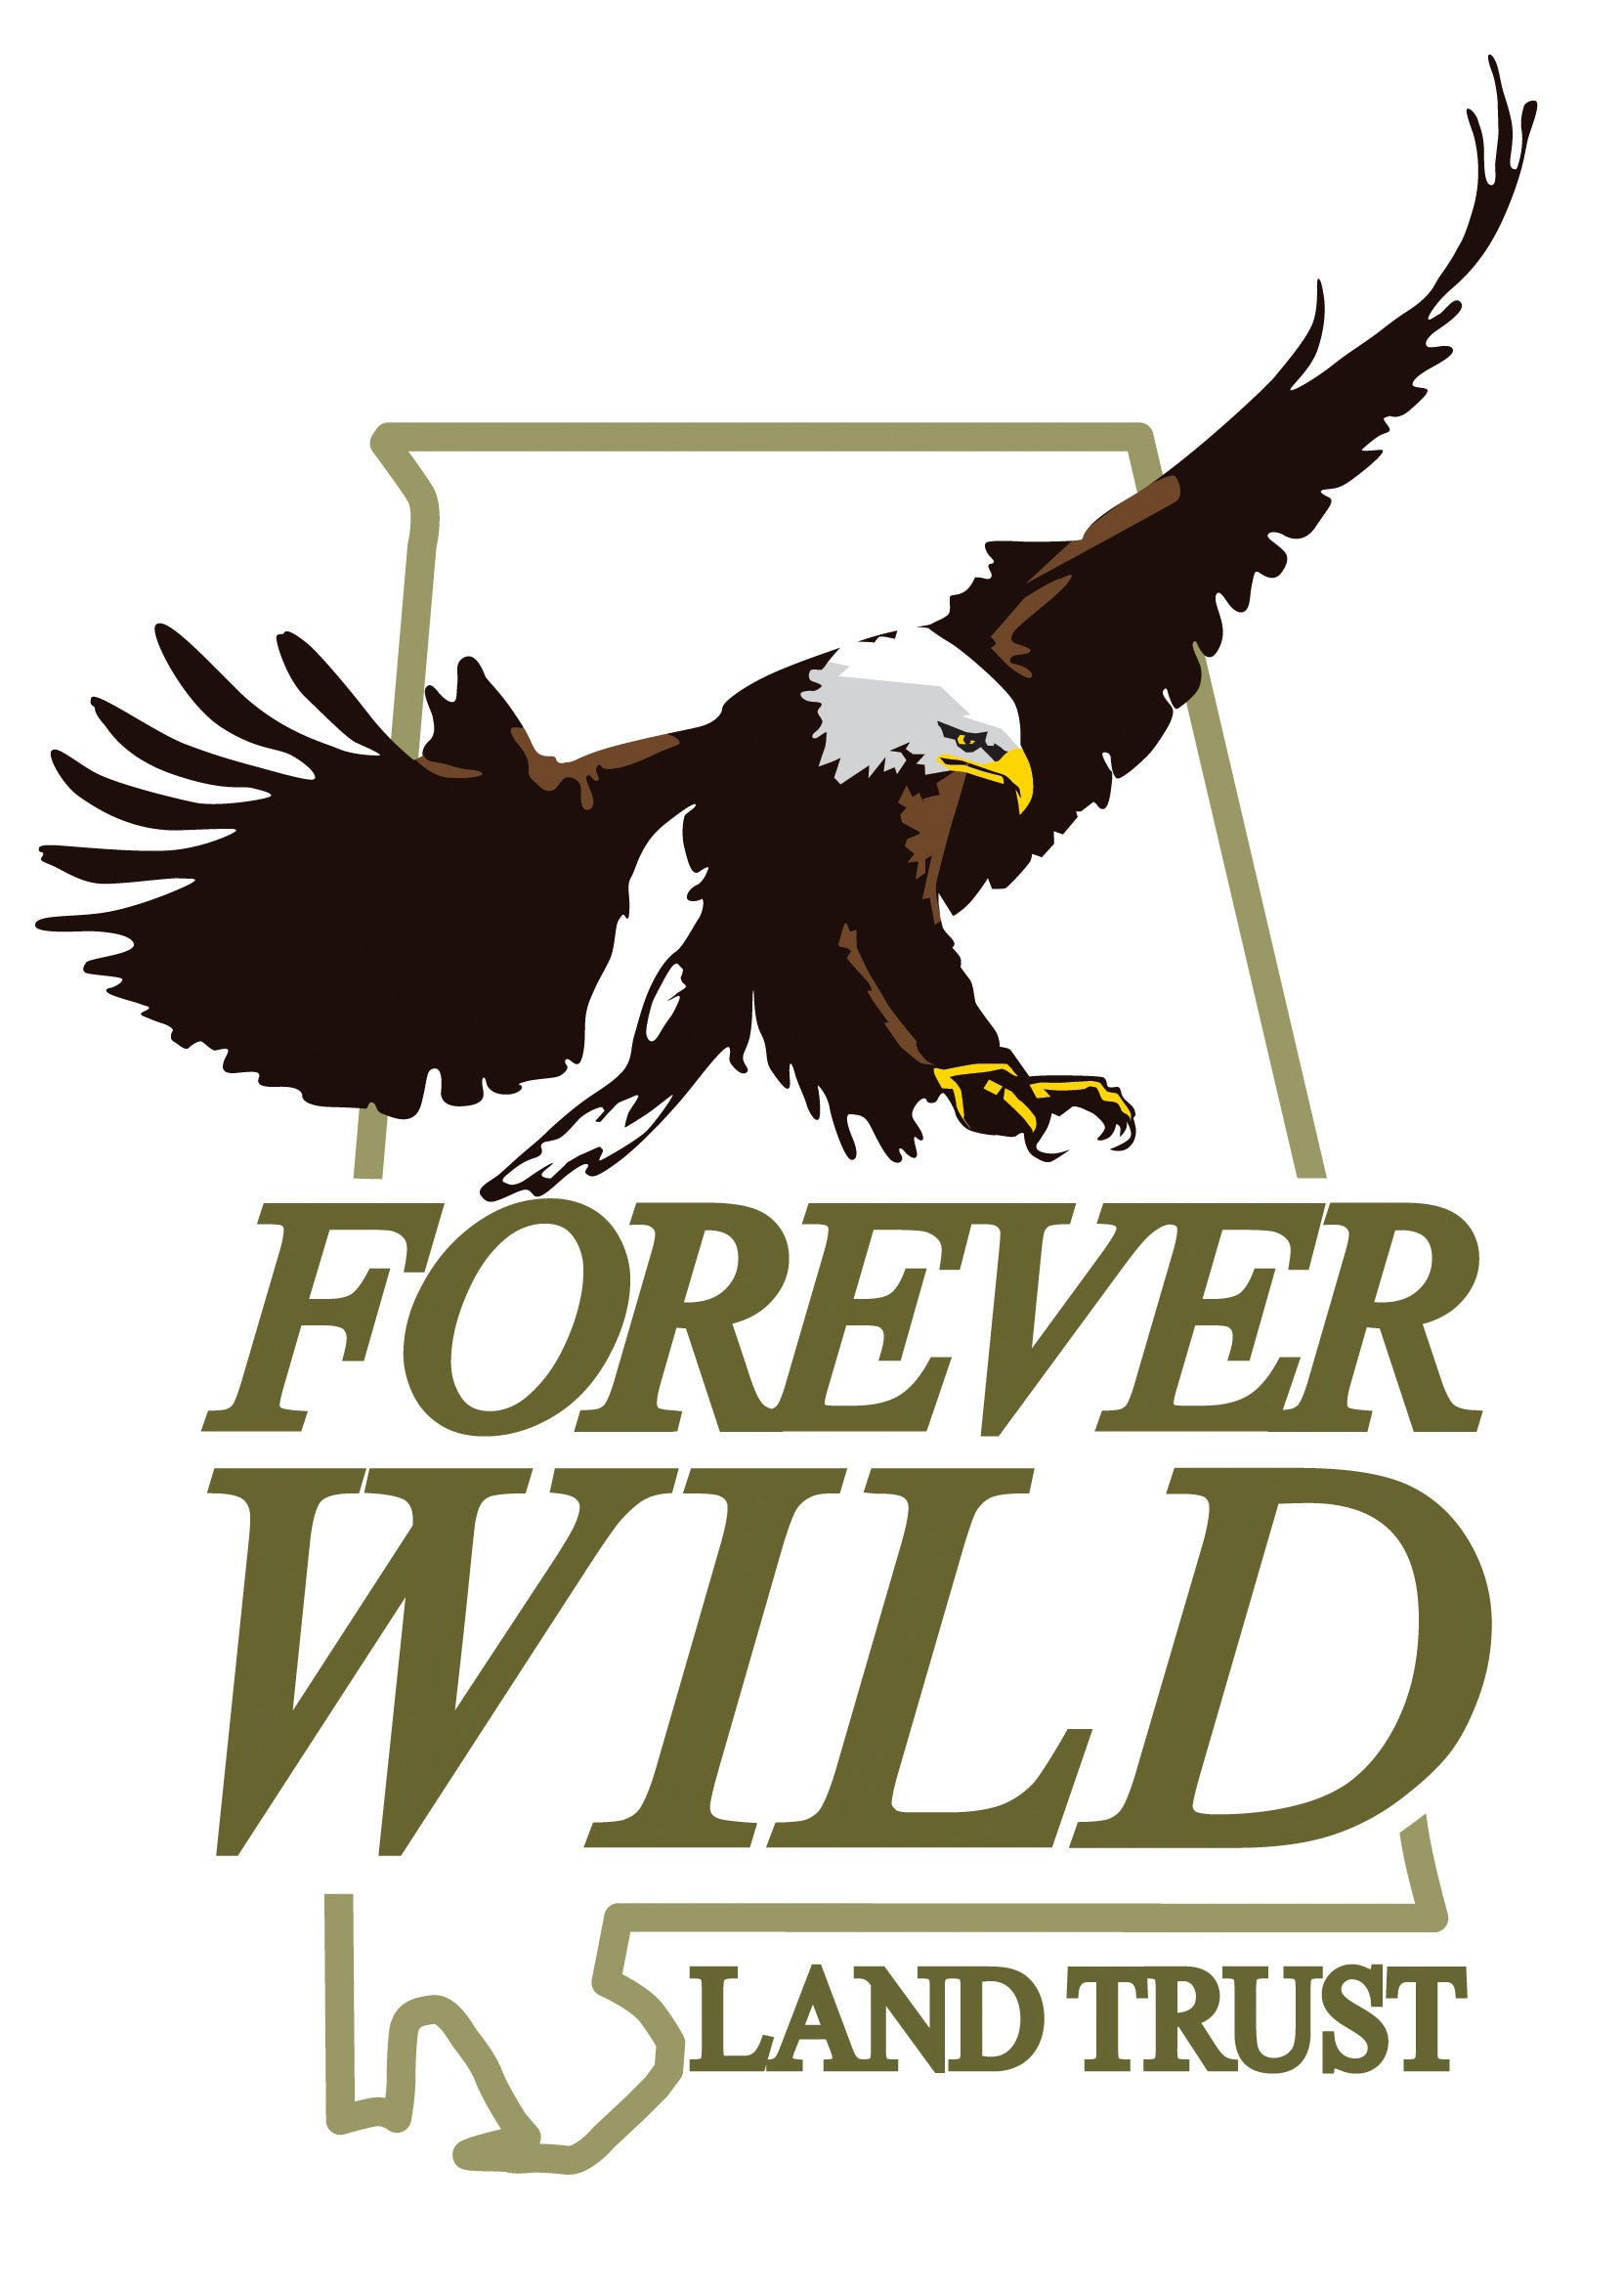 Forever Wild Board Meets in Mobile on August 3 